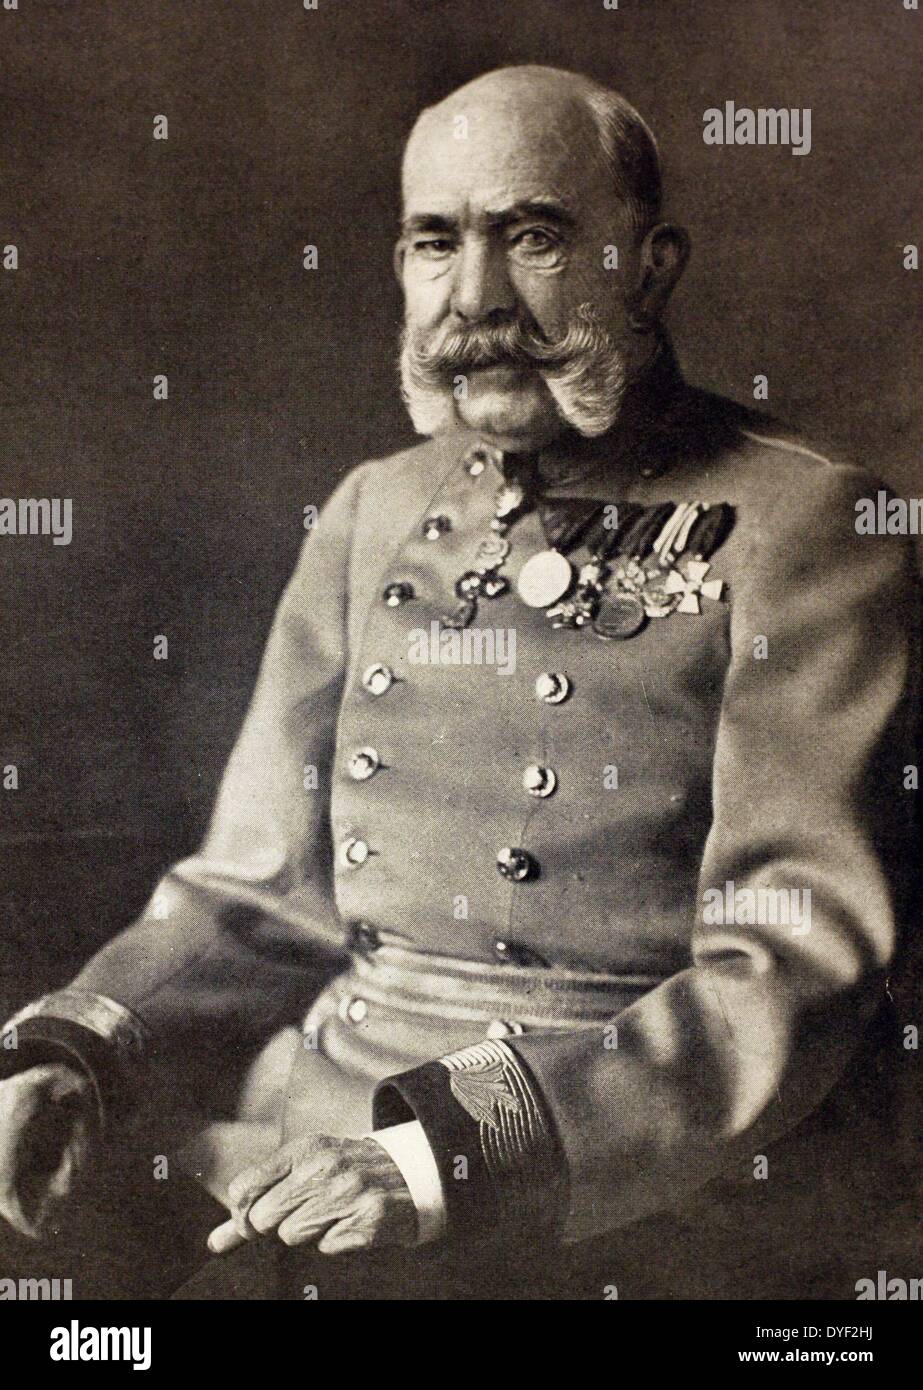 A portrait photograph of Franz Joseph I of Austria. Lived between August 1830 – 21 November 1916. Emperor of Austria, Apostolic King of Hungary, King of Galicia, King of Bohemia, King of Croatia and Lodomeria and Grand Duke of Cracow from 1848 until his death in 1916. He was also President of the German Confederation from 1 May 1850 until 24 August 1866. Stock Photo